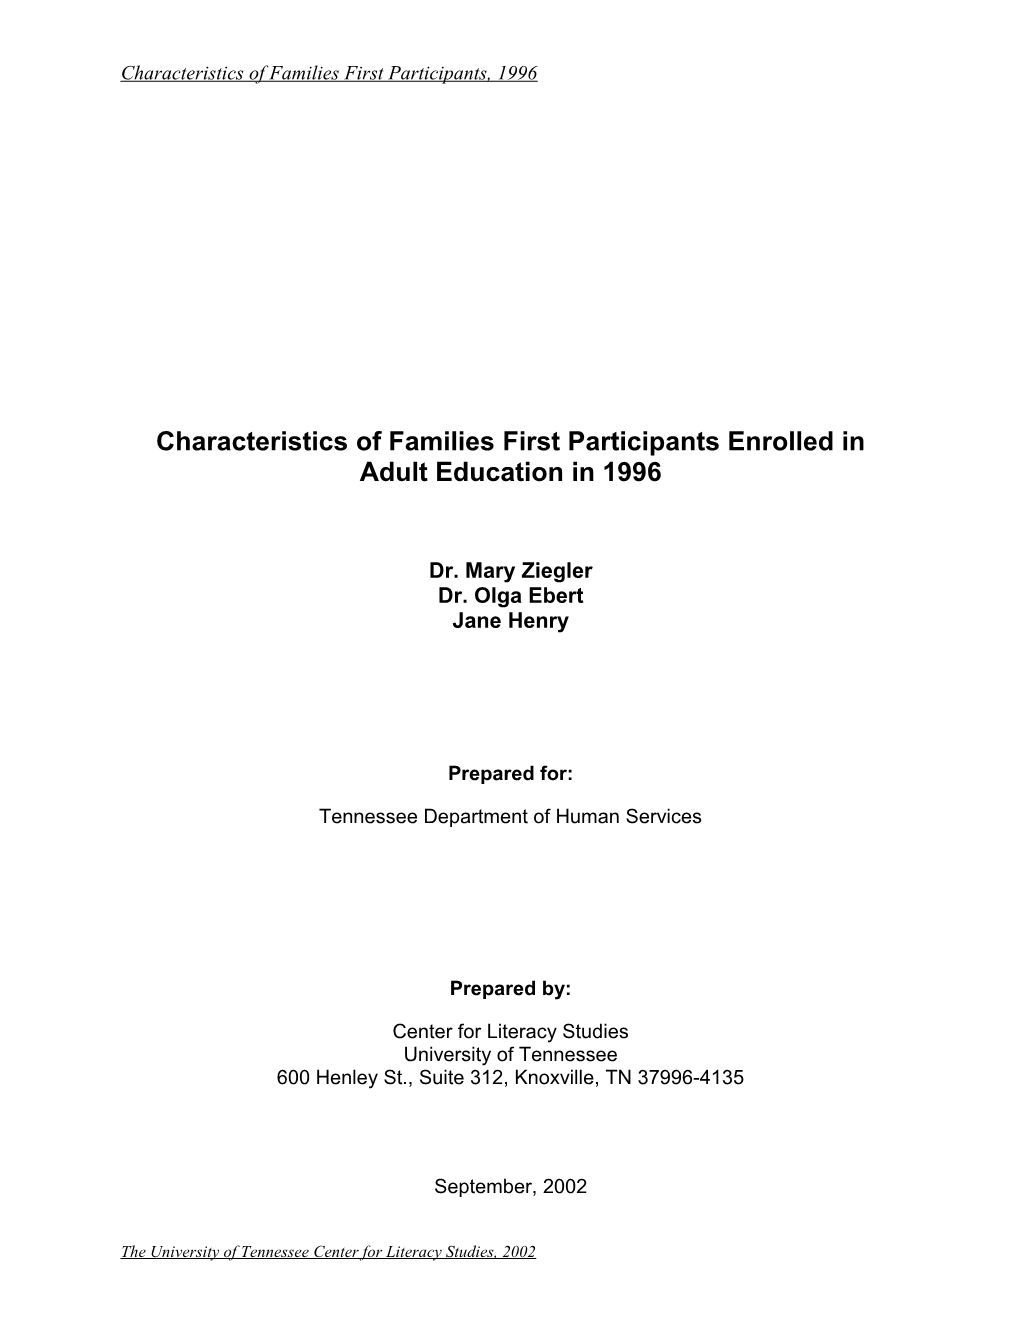 Characteristics of Families First Participants Enrolled in Adult Education in 1996